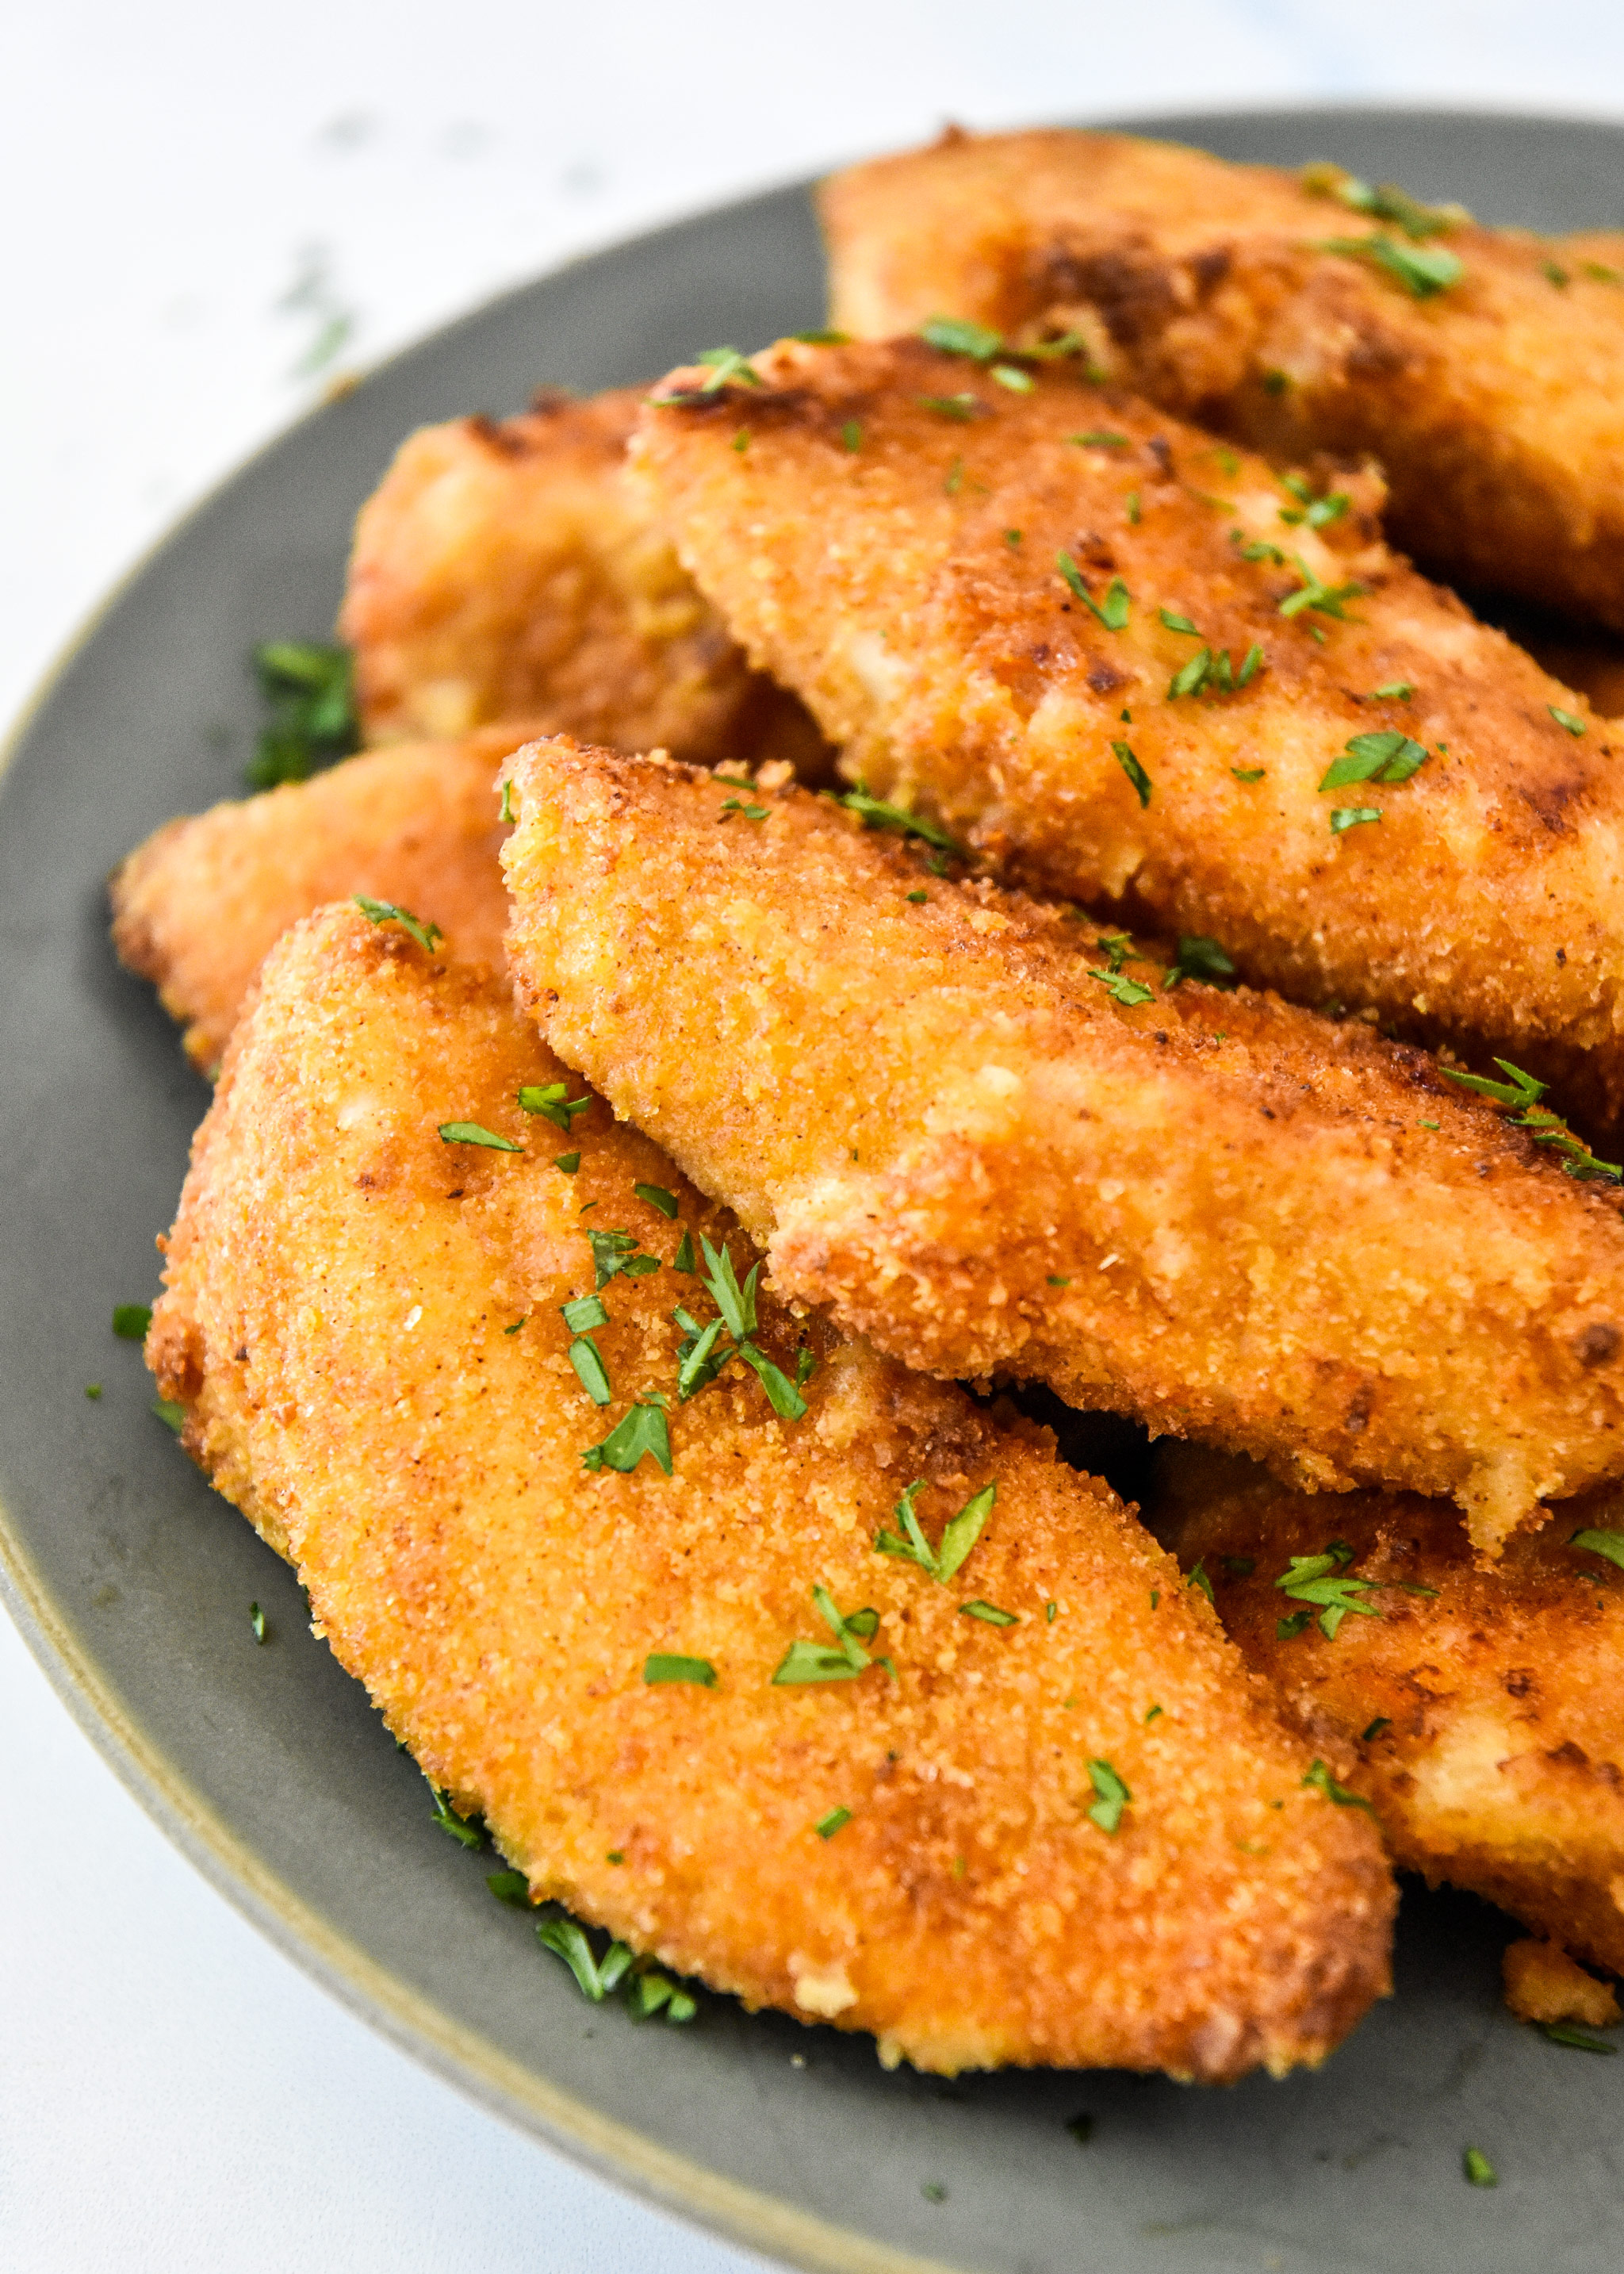 delicious air fryer breaded chicken tenders on a plate ready to eat.